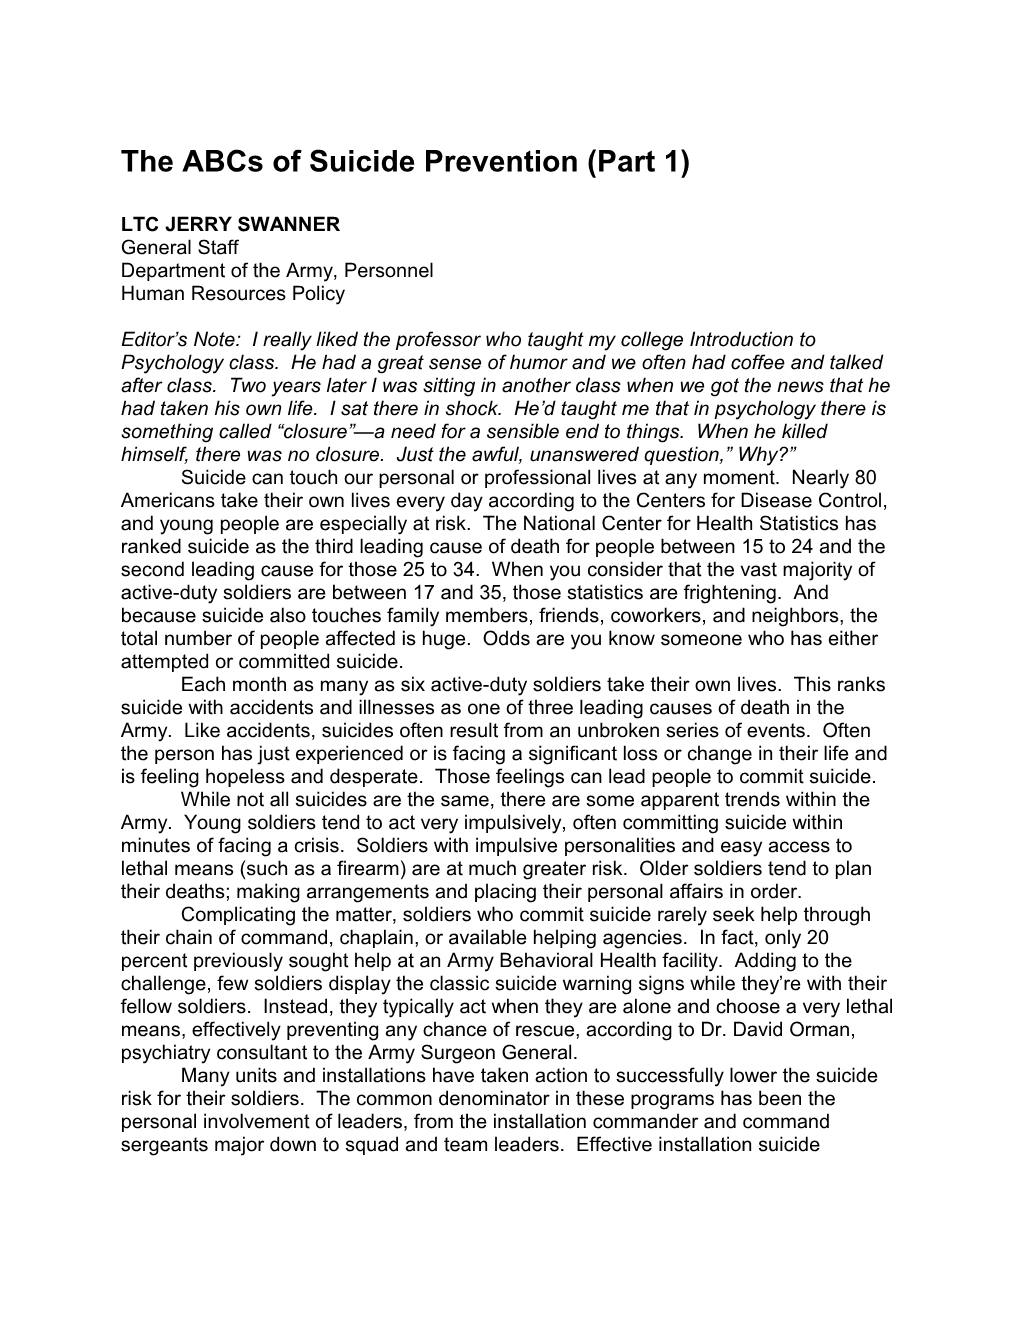 The Abcs of Suicide Prevention (Part 2)